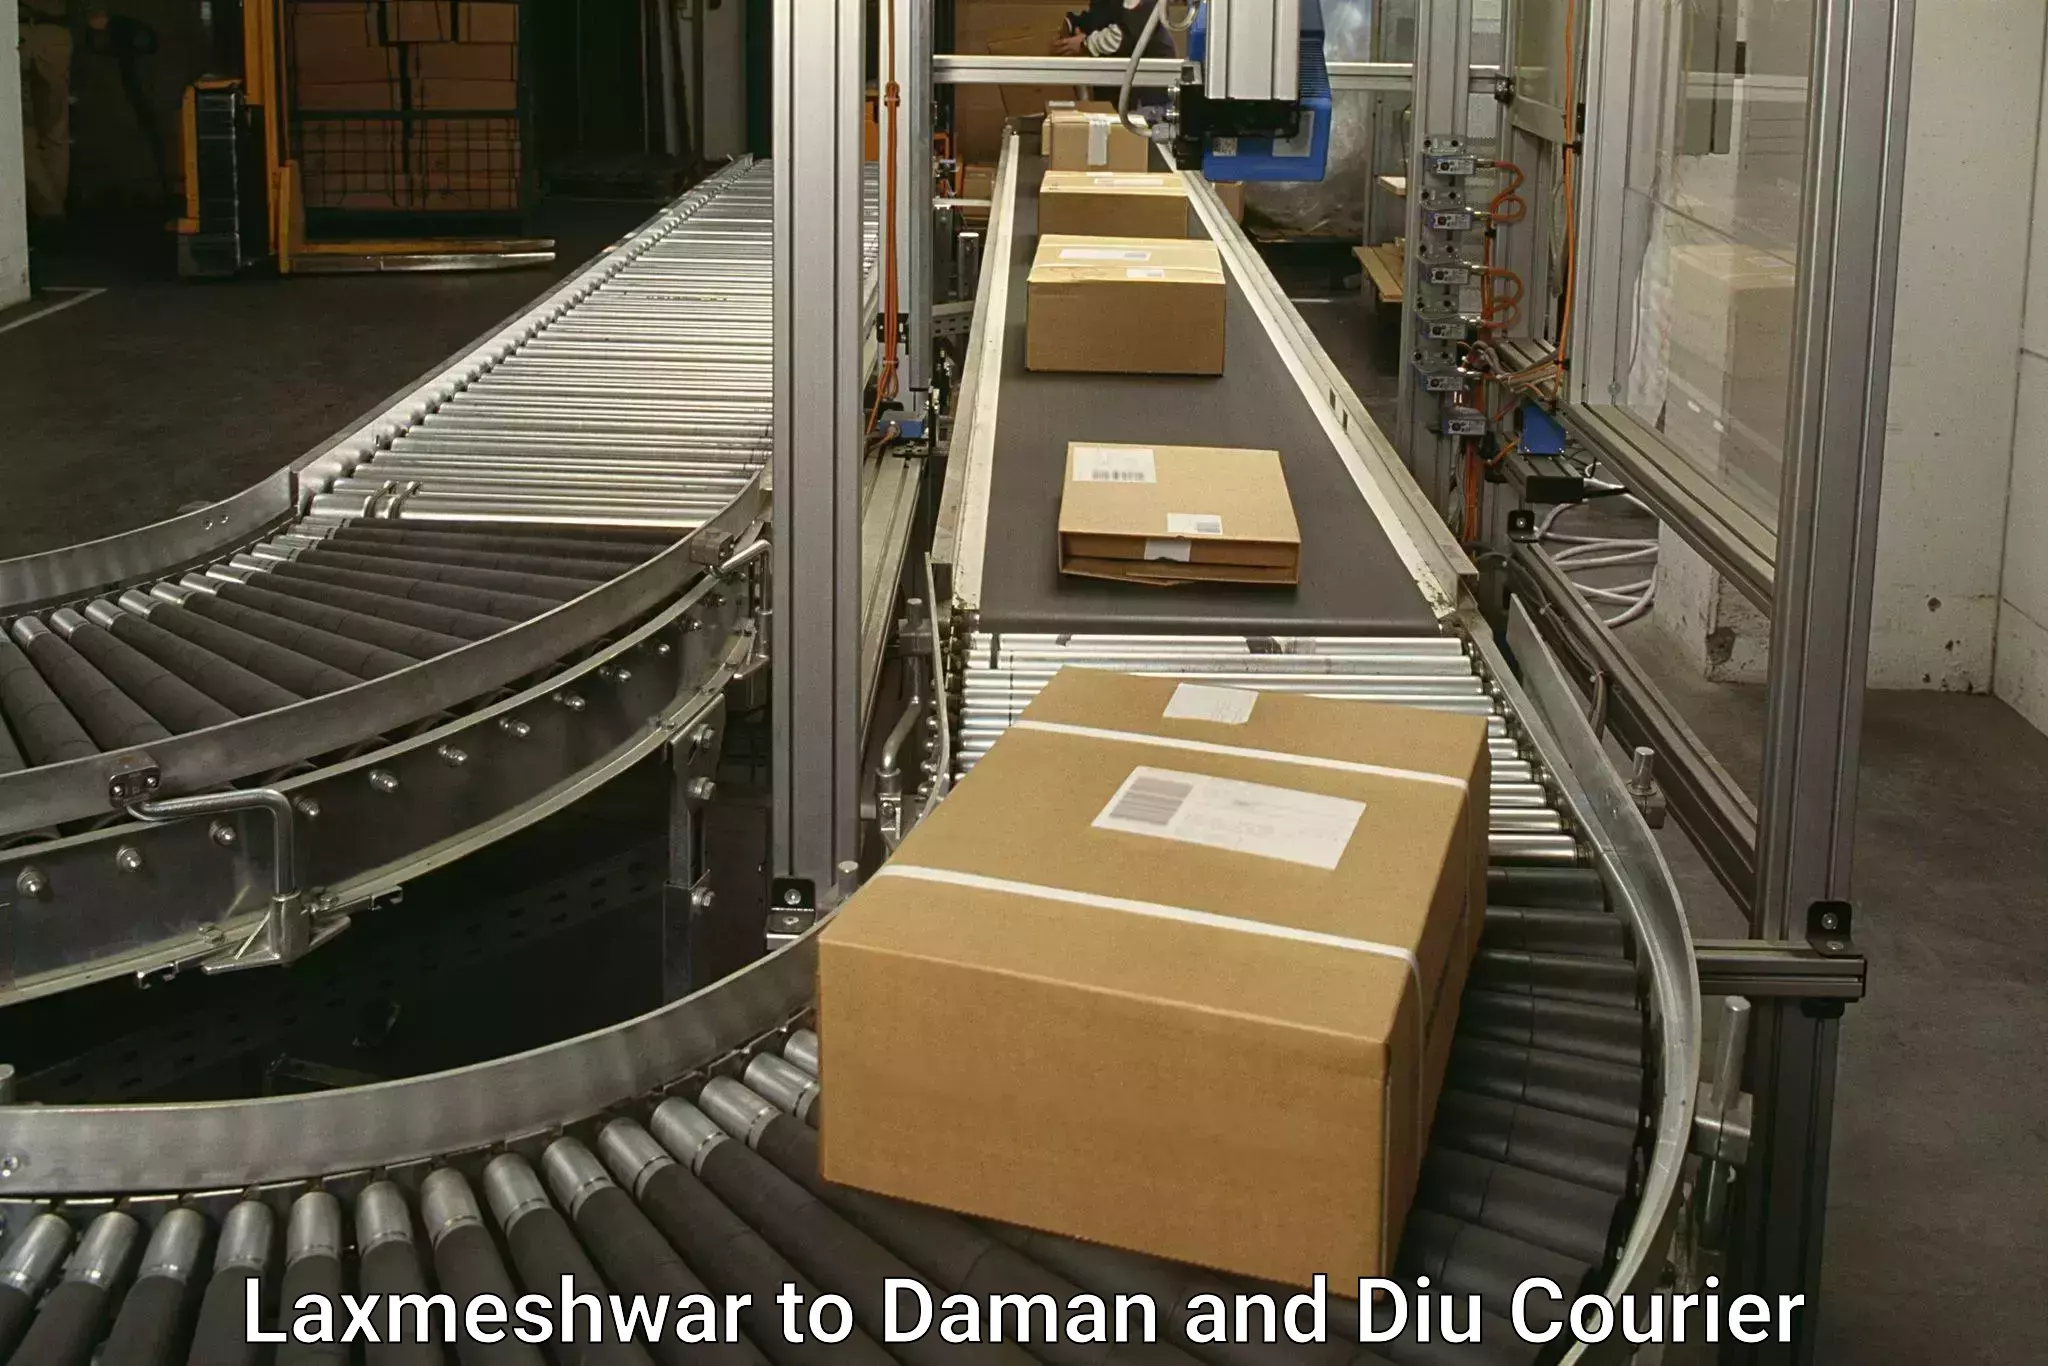 Express delivery capabilities Laxmeshwar to Diu